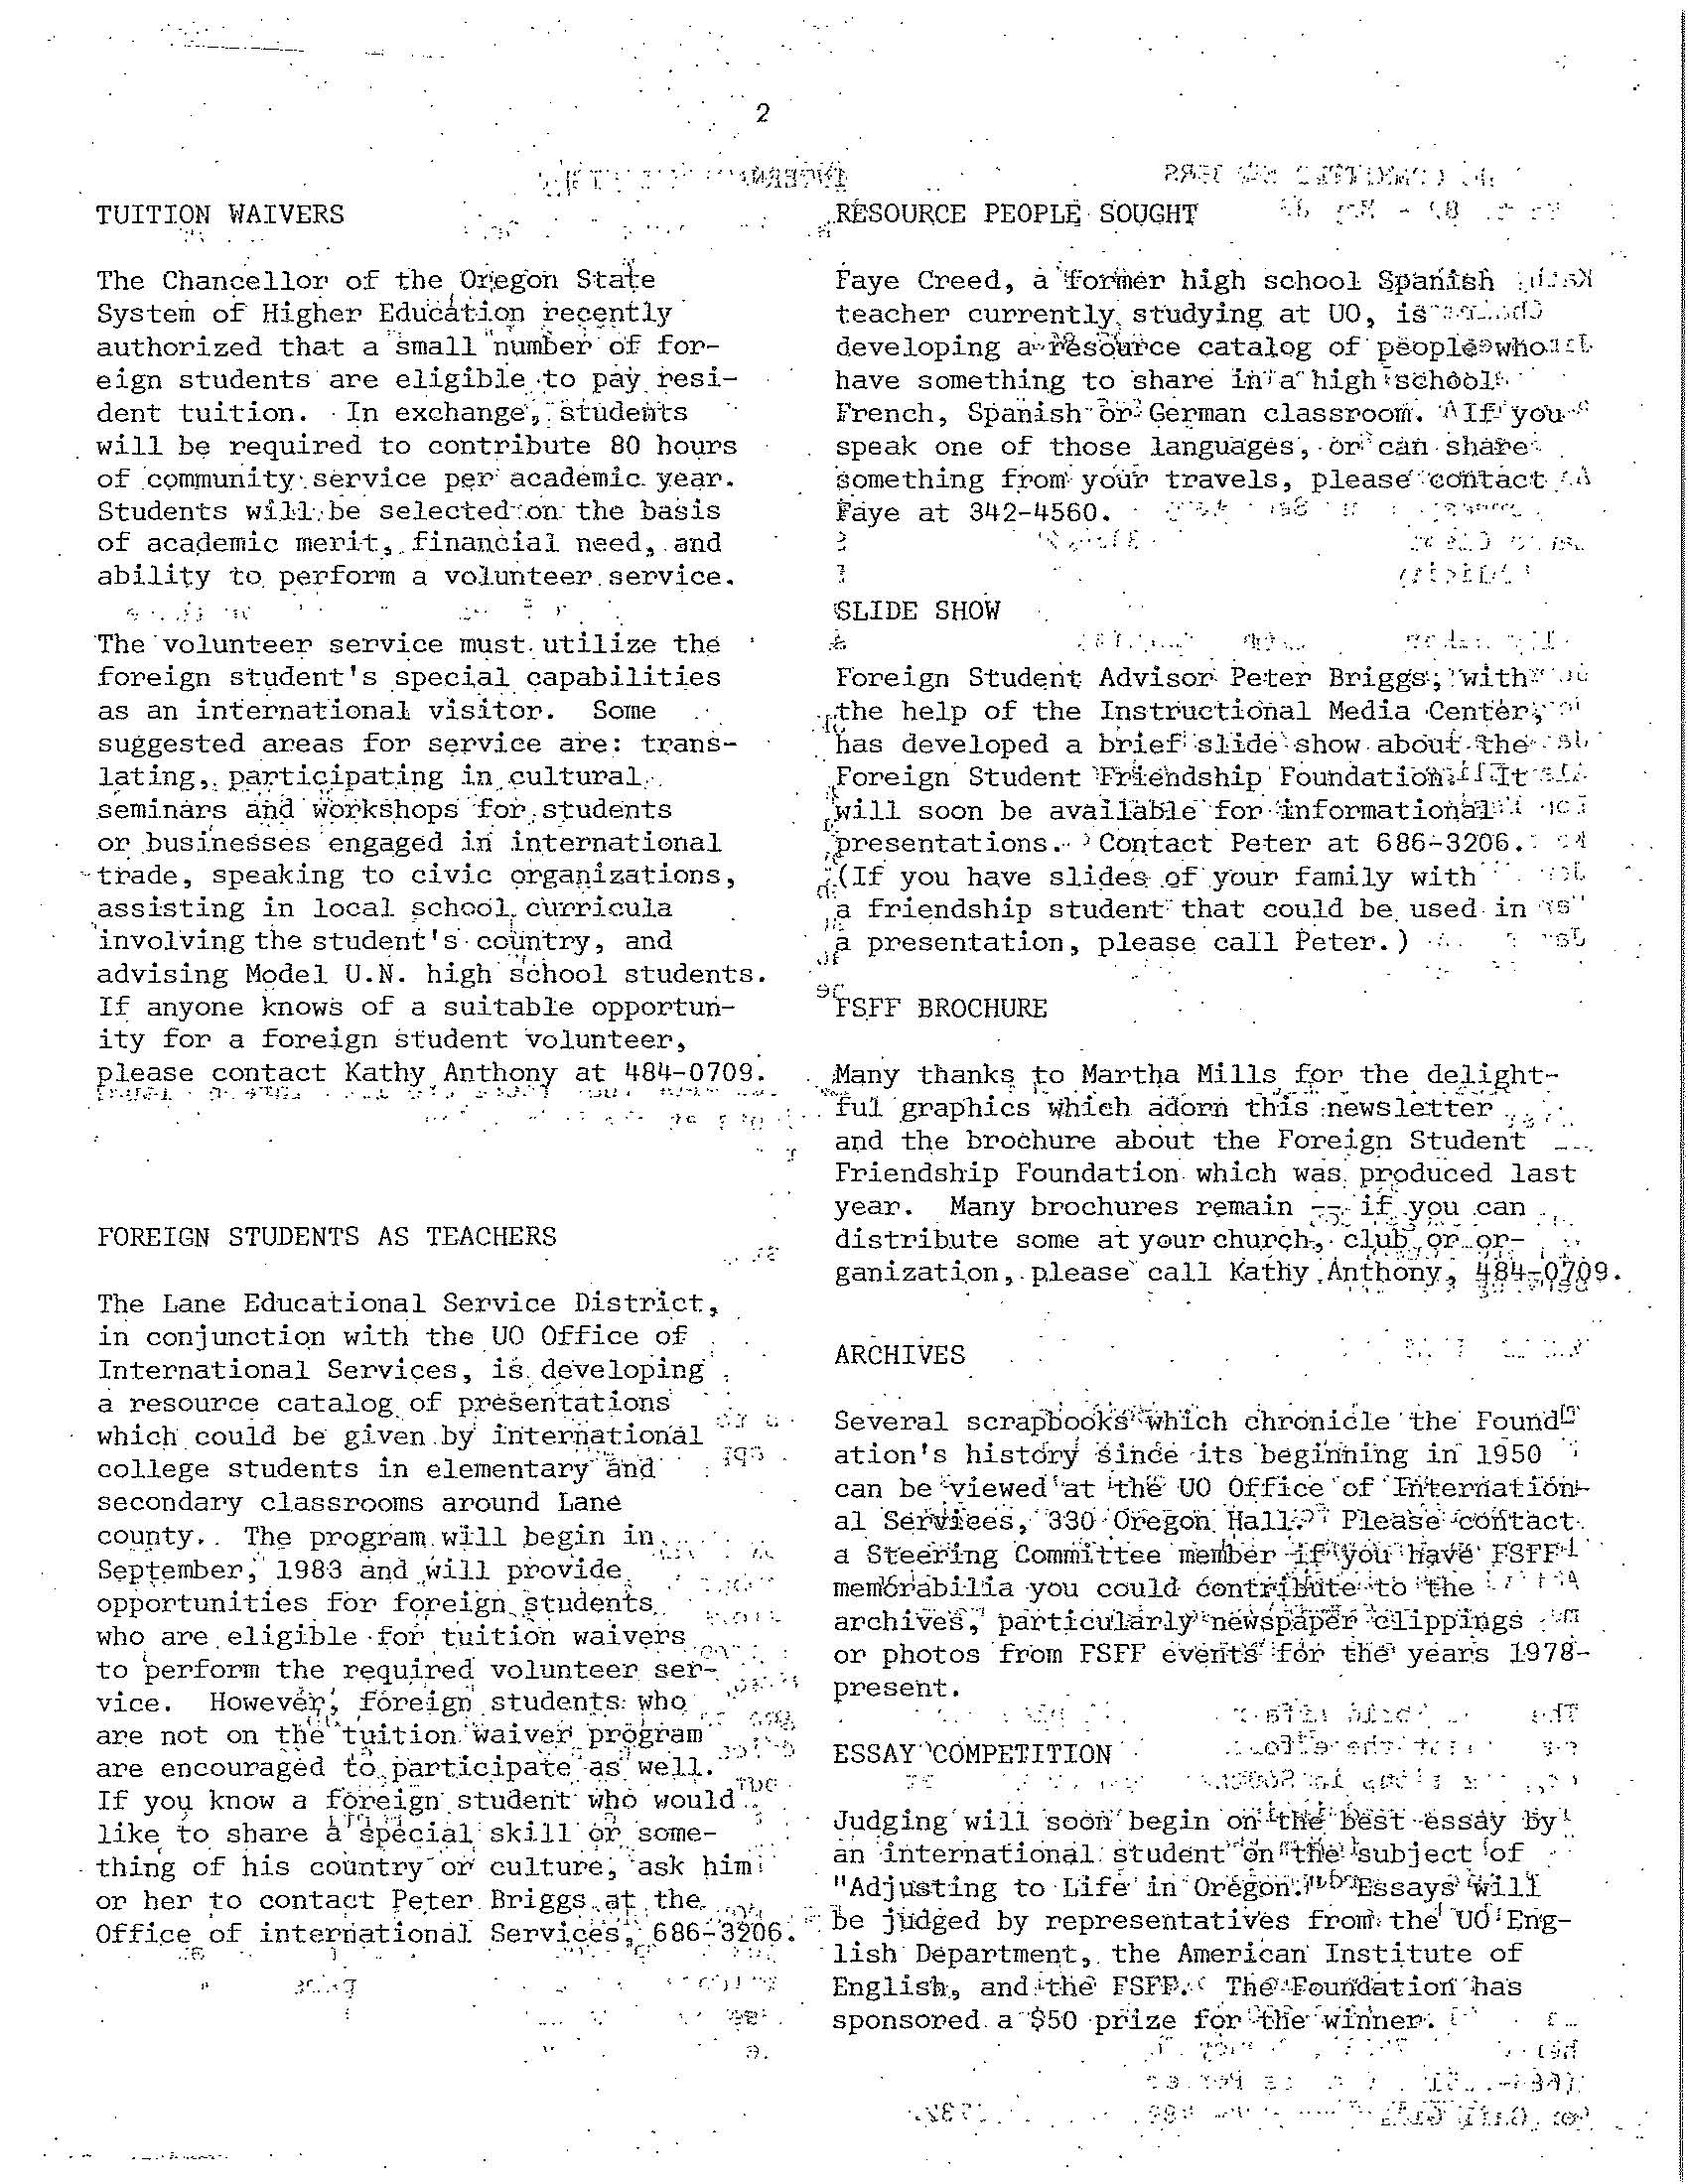 1983 Winter Newsletter, Page_2